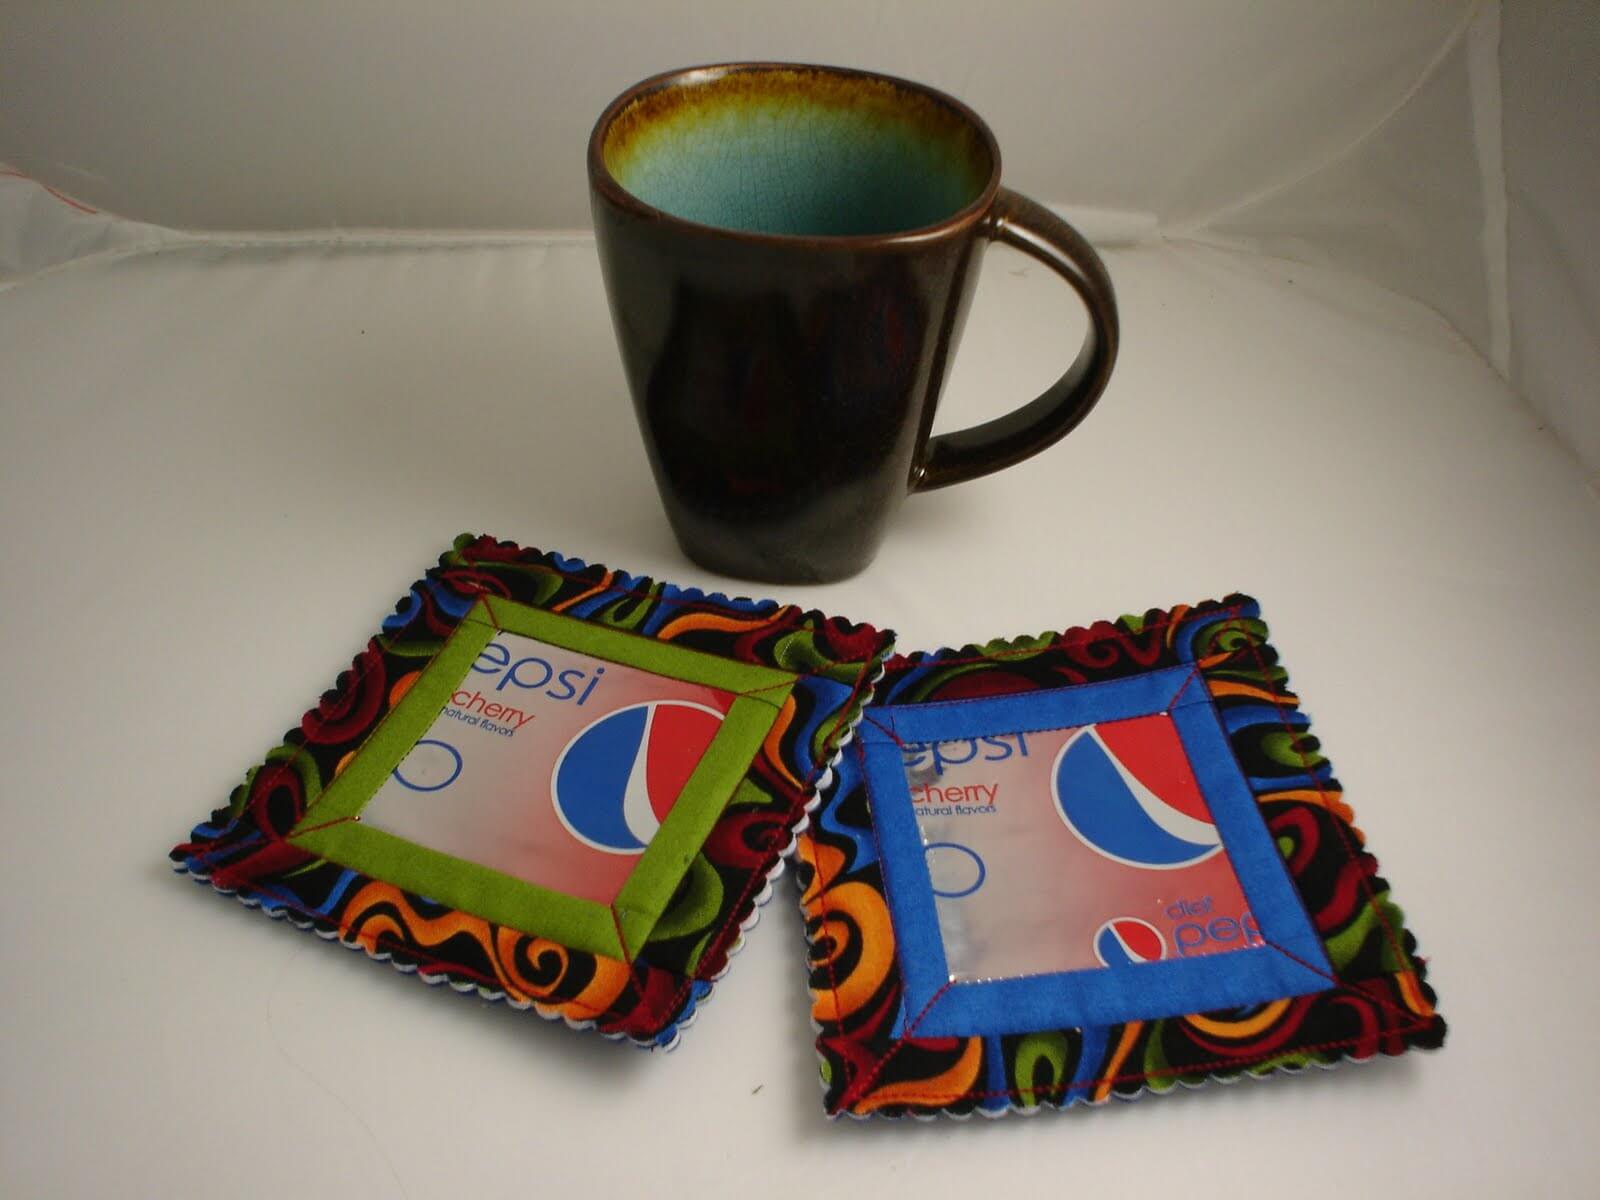 DIY soda can coasters the kids will love to make